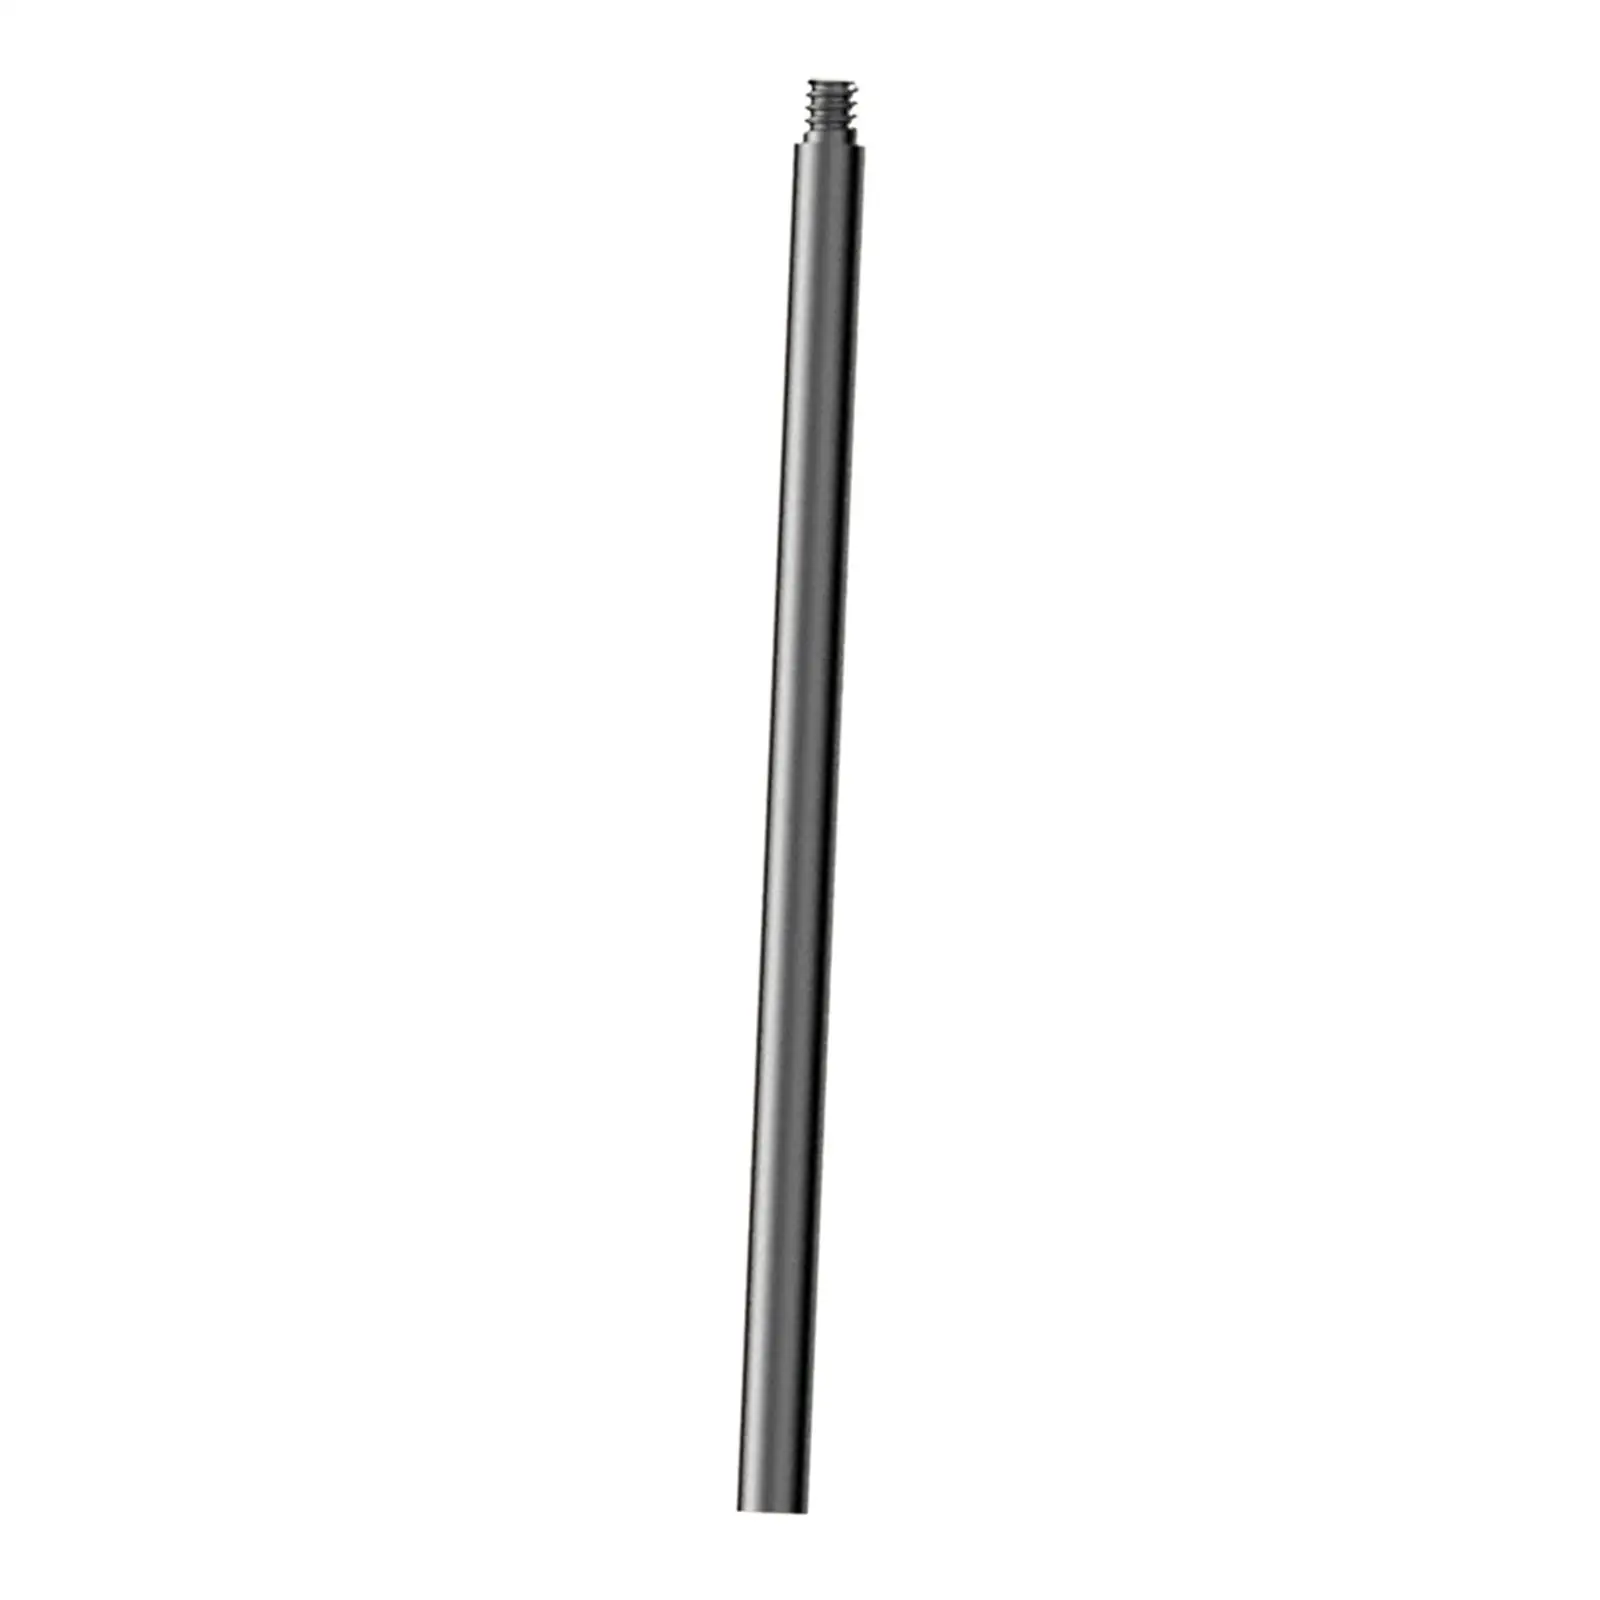 Lantern Stand Extension Rod Durable Extension Pole for Light Support Holder